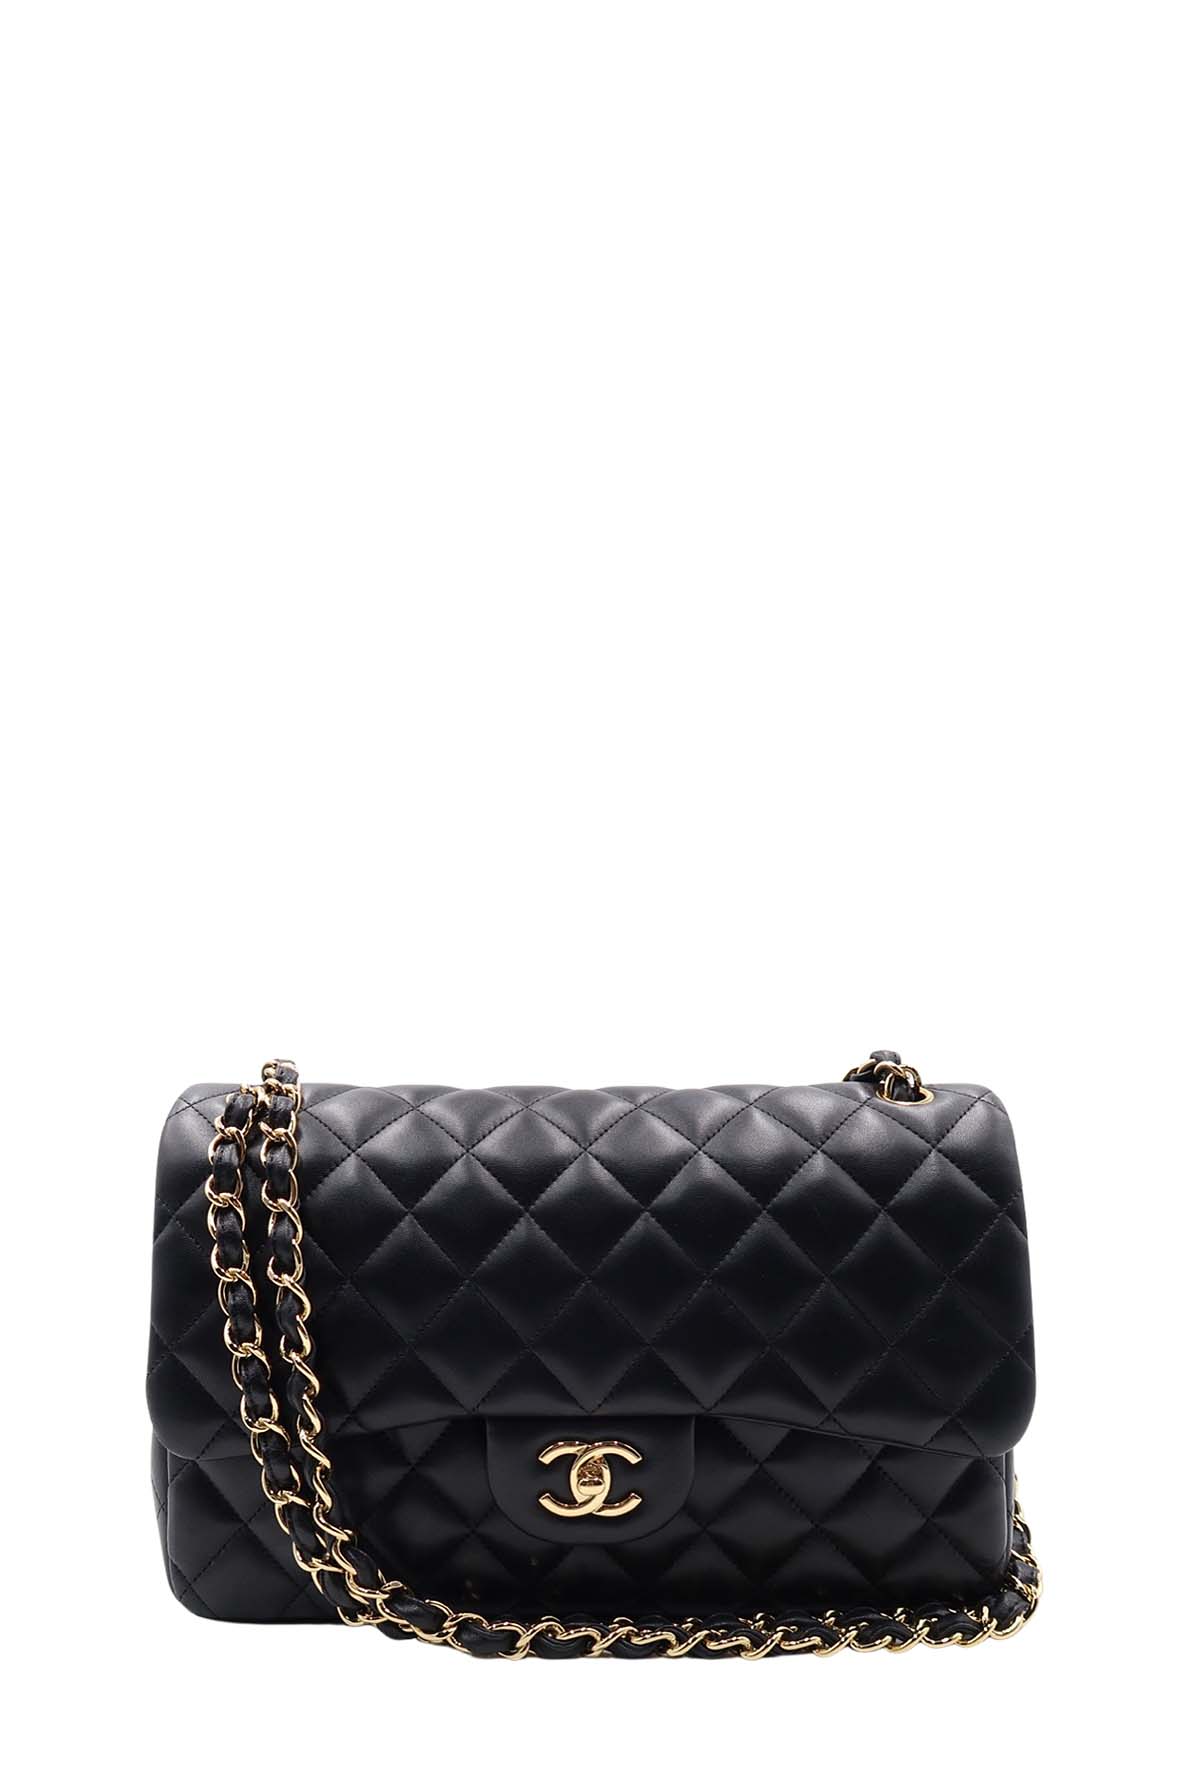 Chanel Quilted SHW CC Classic Flap Jumbo Shoulder Bag Lambskin